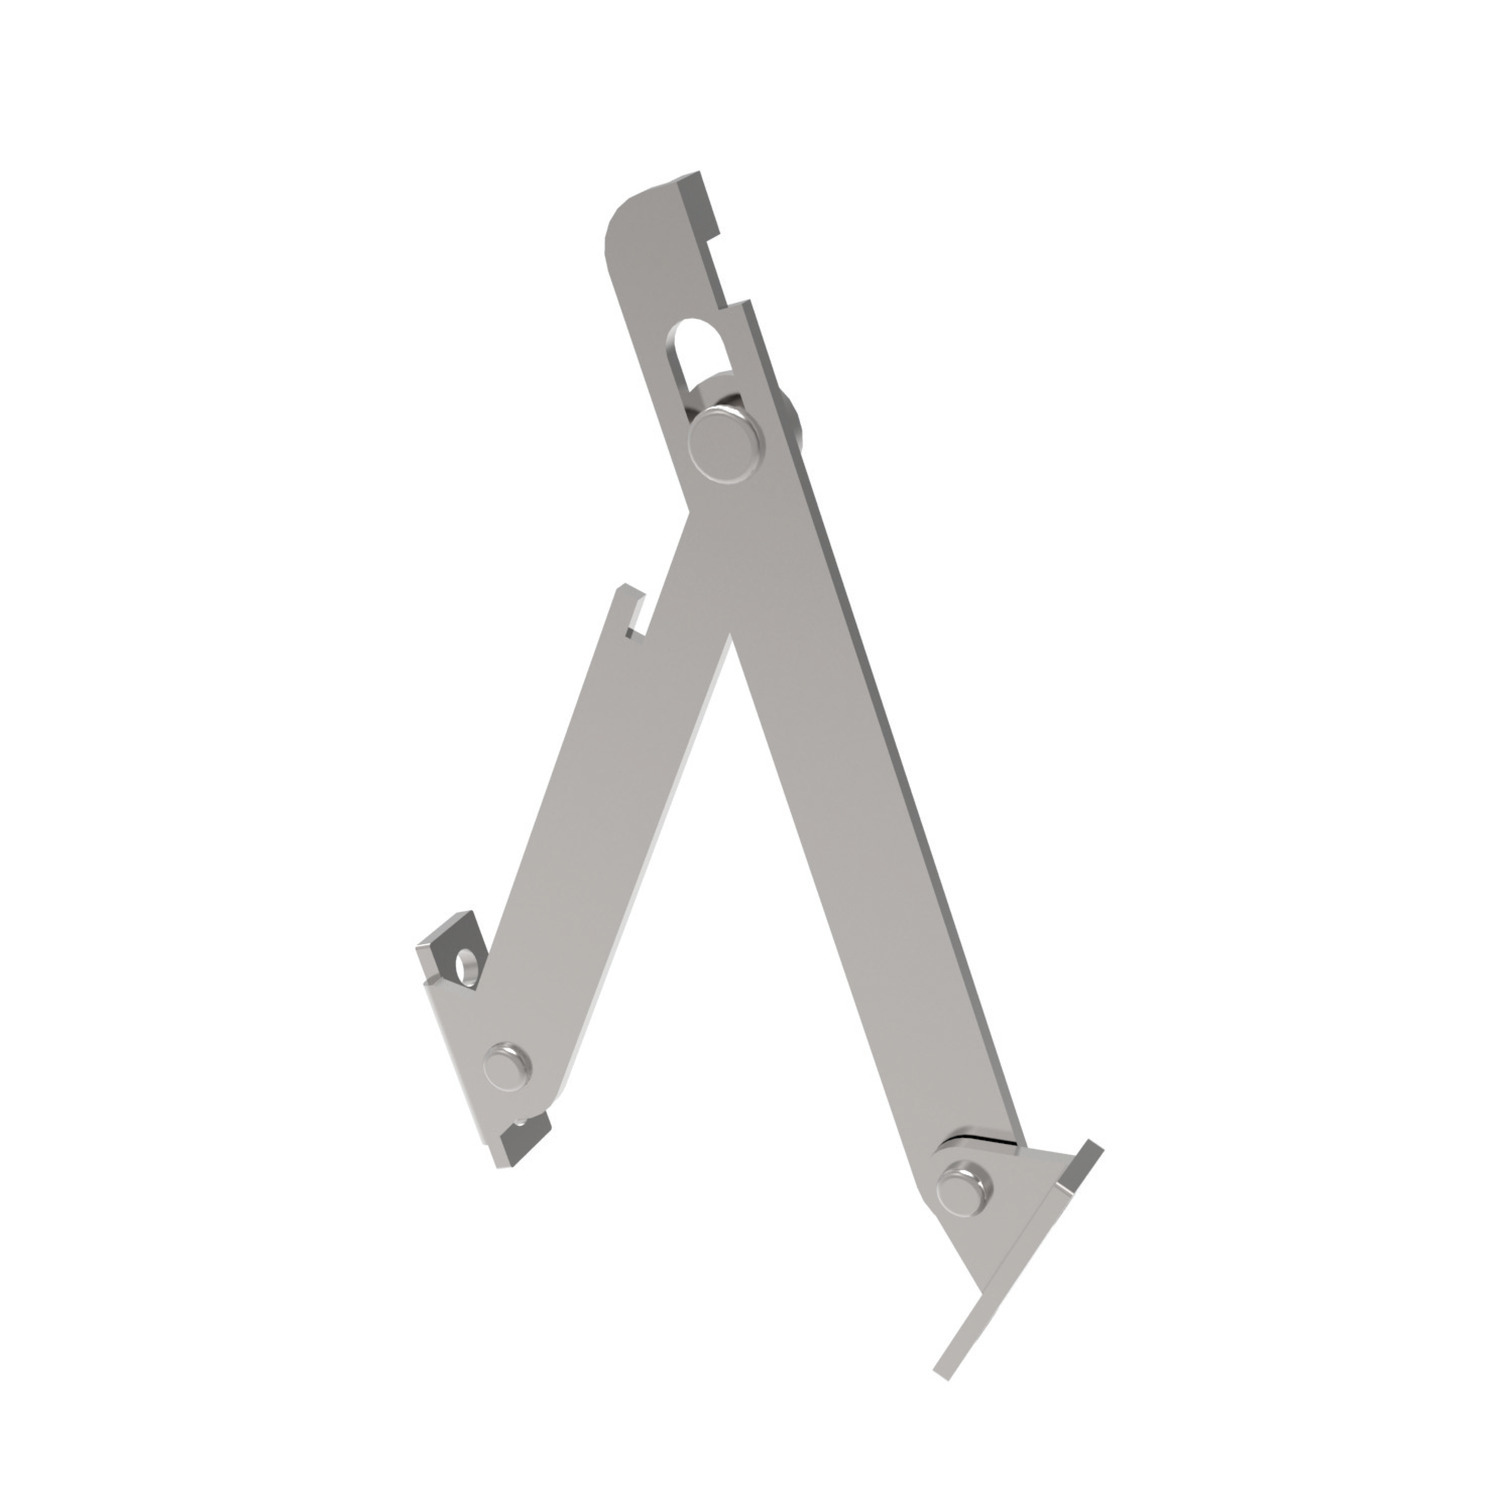 N0954.AC0006 Lid Stays Stainless steel - Right - 135mm.